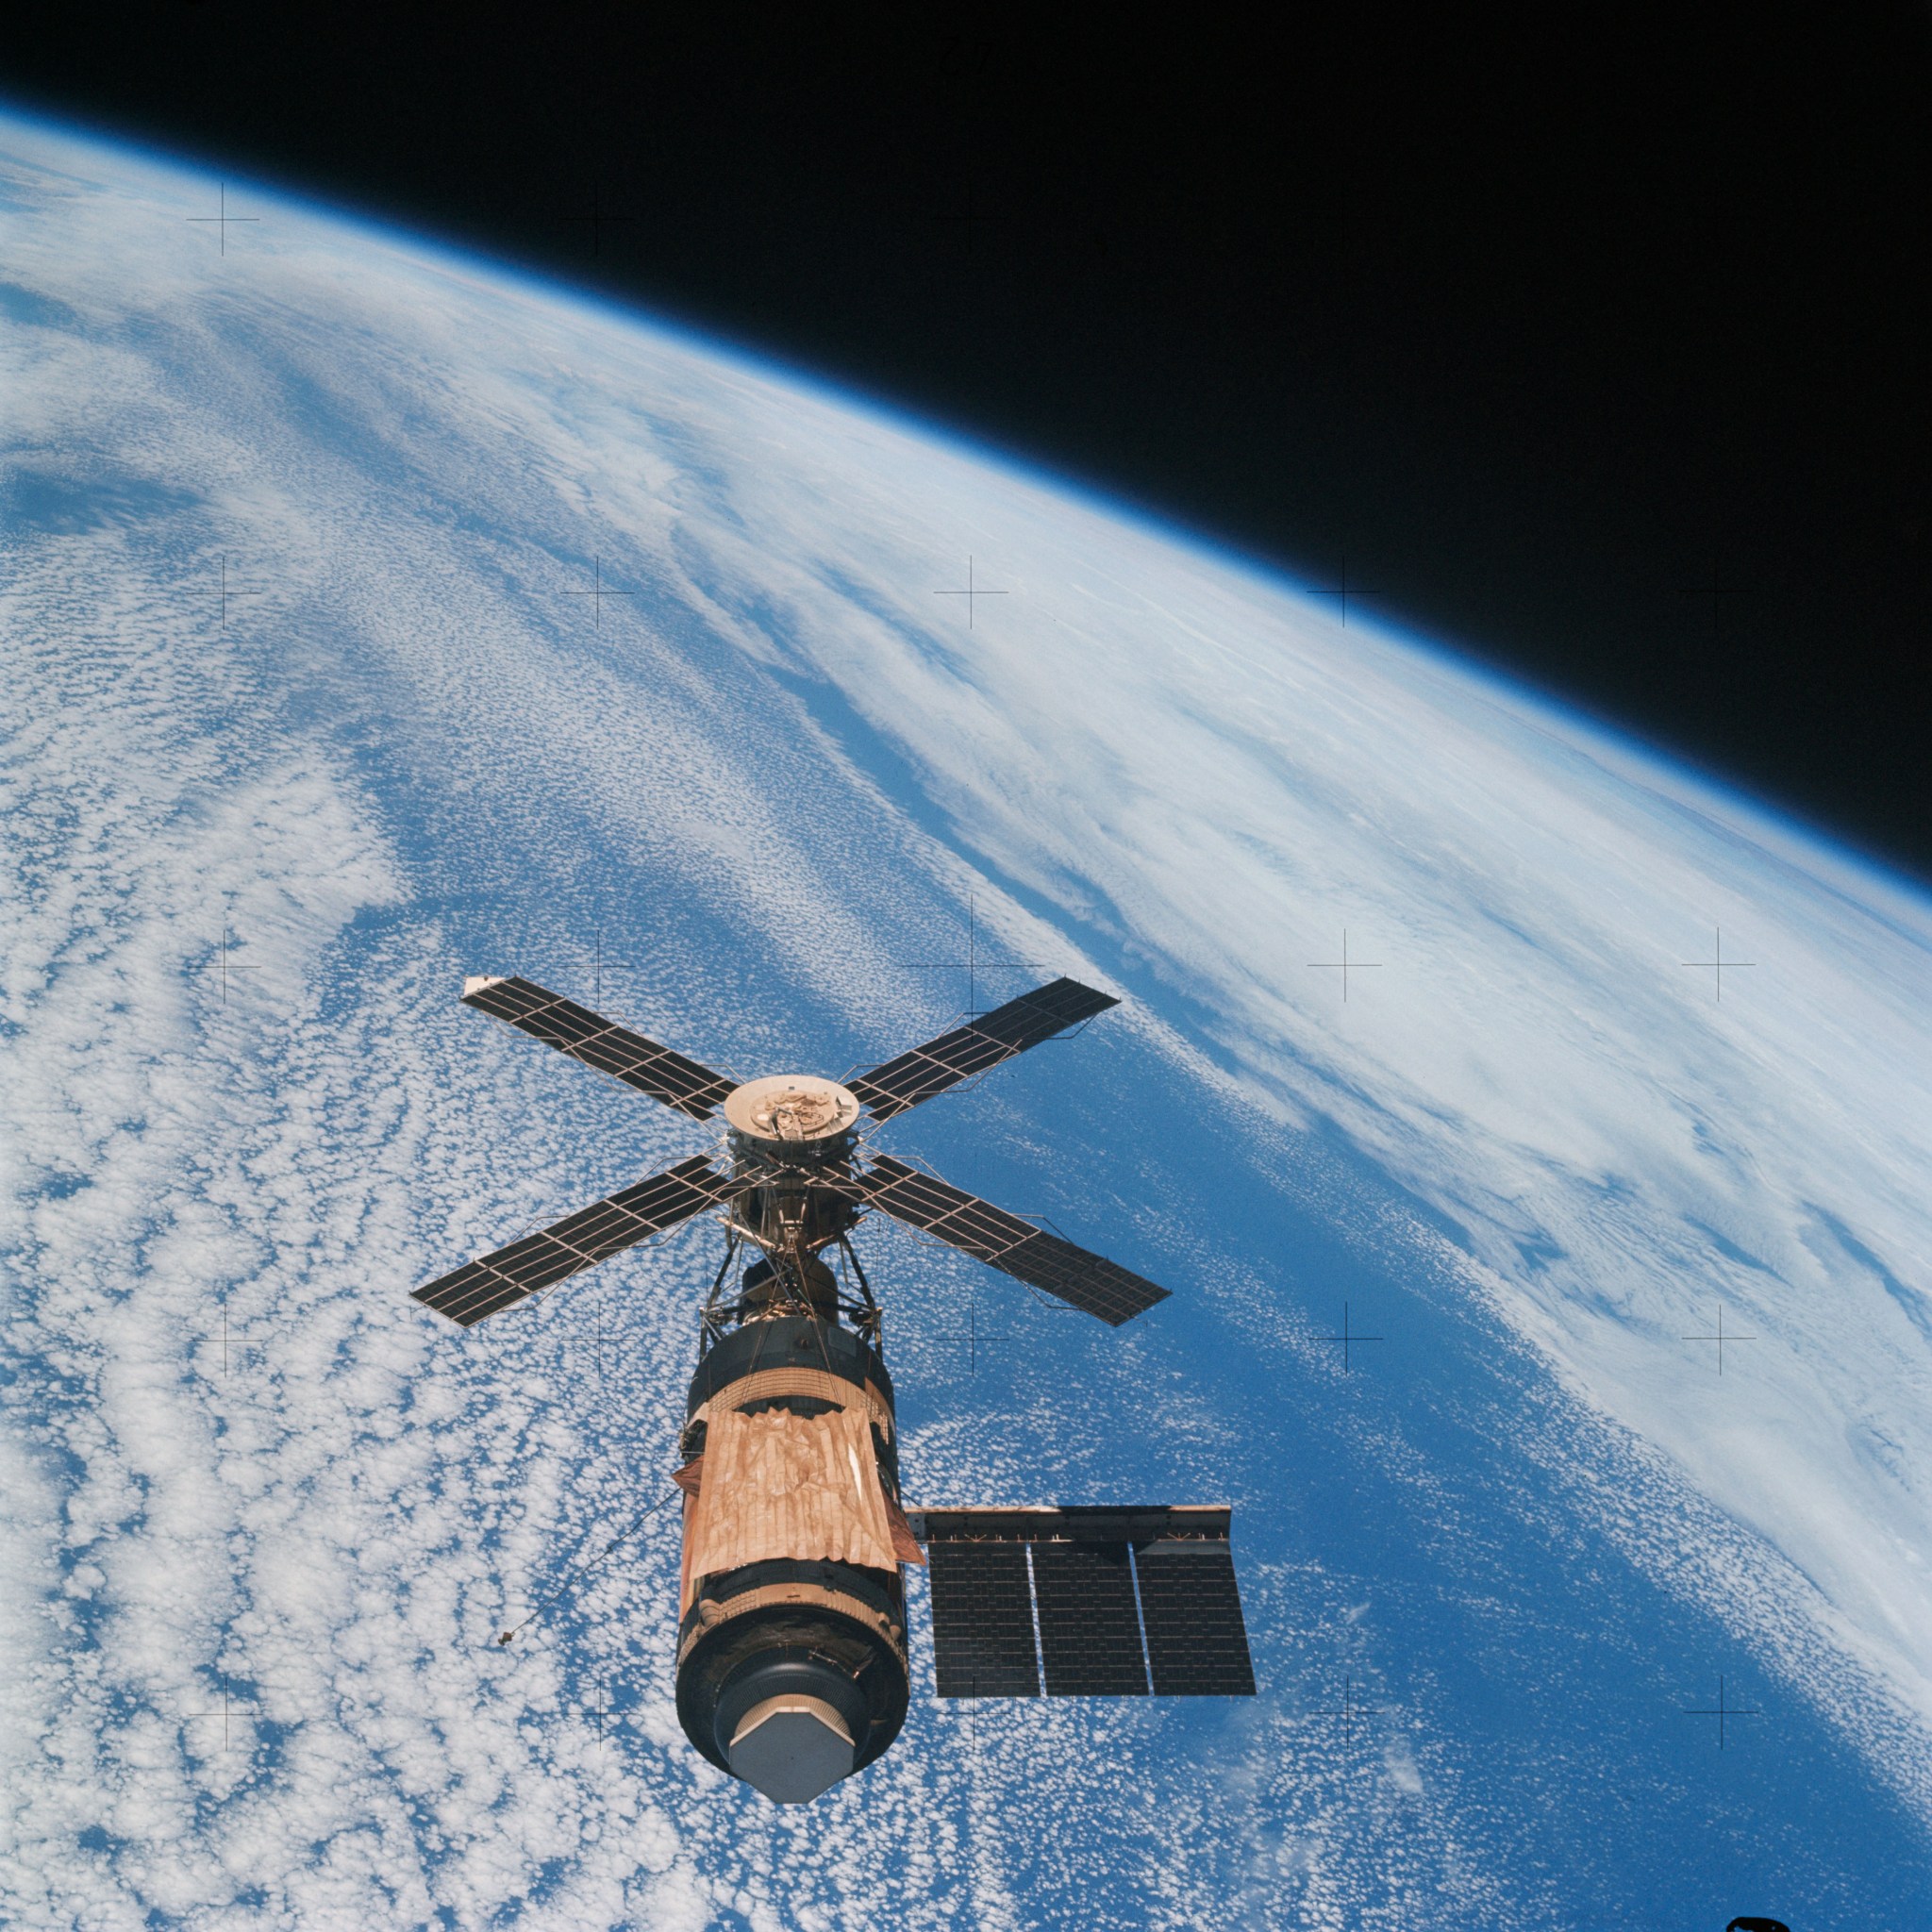 On February 8, 1974, Skylab?s final manned mission (Skylab 4) left behind America?s first space station after a stay of 84 d